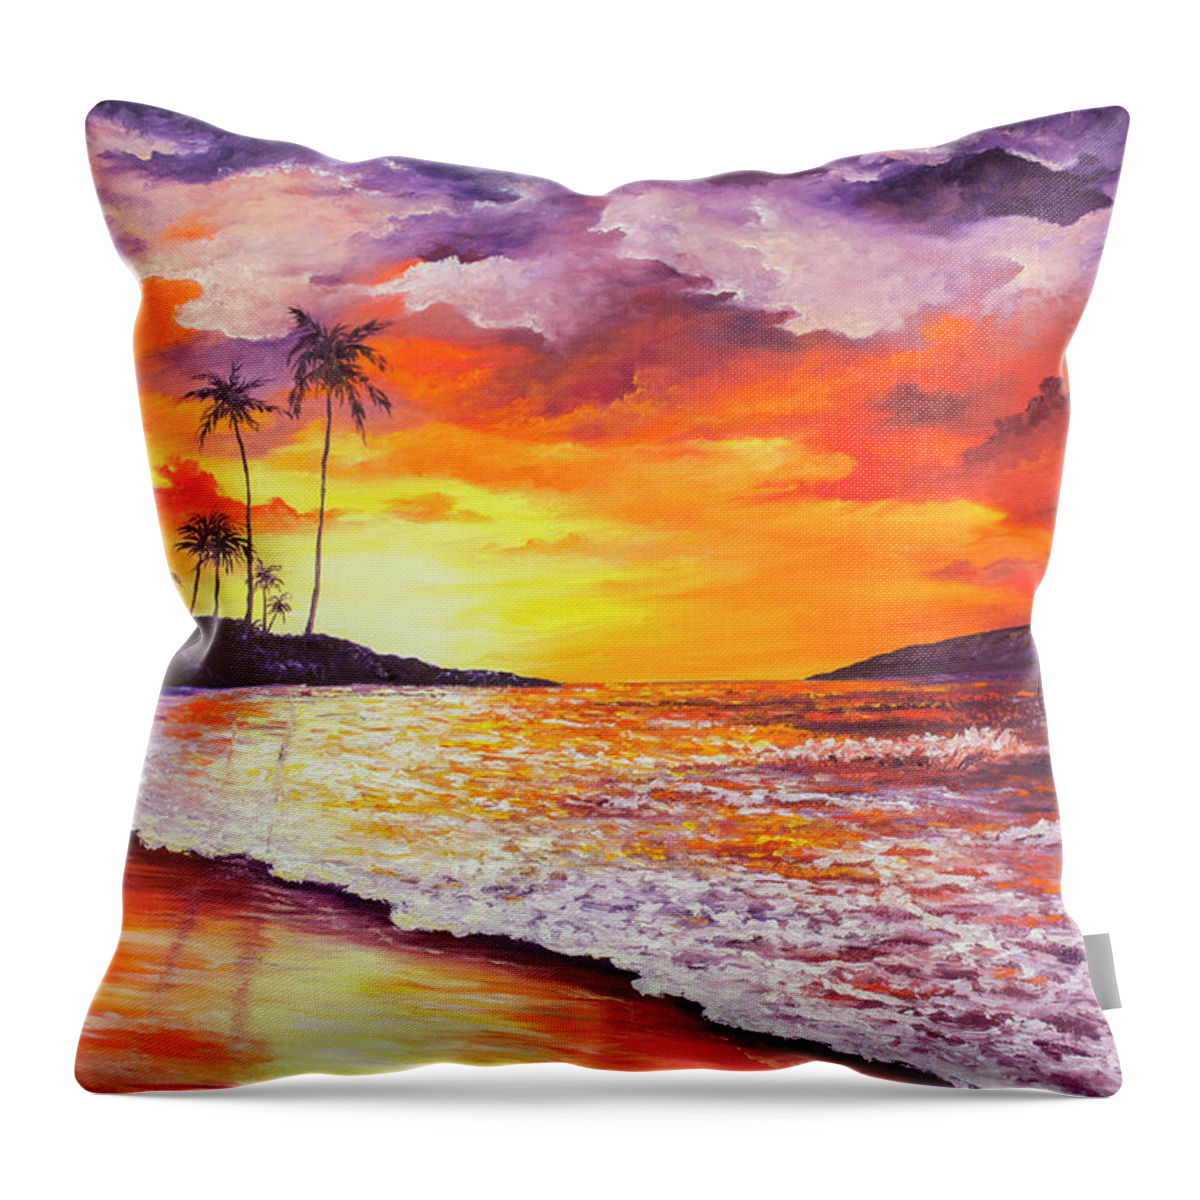 Darice Throw Pillow featuring the painting Sunset At Kapalua Bay by Darice Machel McGuire